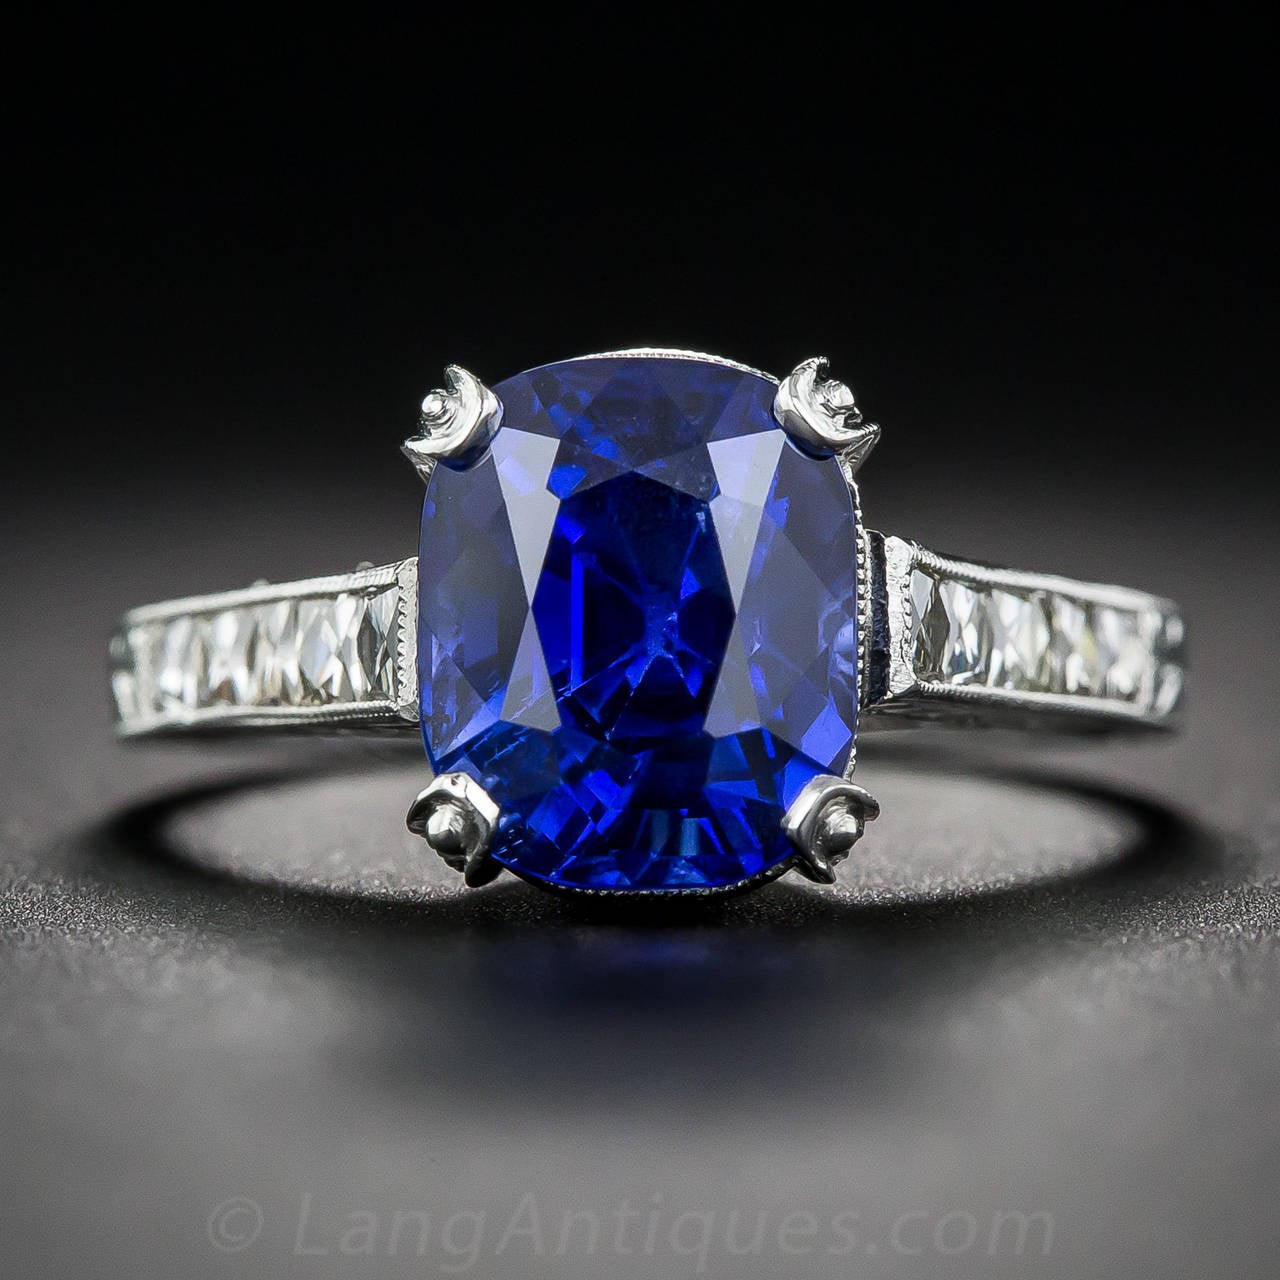 A seriously 'gemmy', natural, no-heat sapphire, weighing 4.90 carat and originating from old Burma beams from within a newly handmade platinum mounting, rendered in enduring vintage style, enlivened with French-cut diamonds shimmering along the